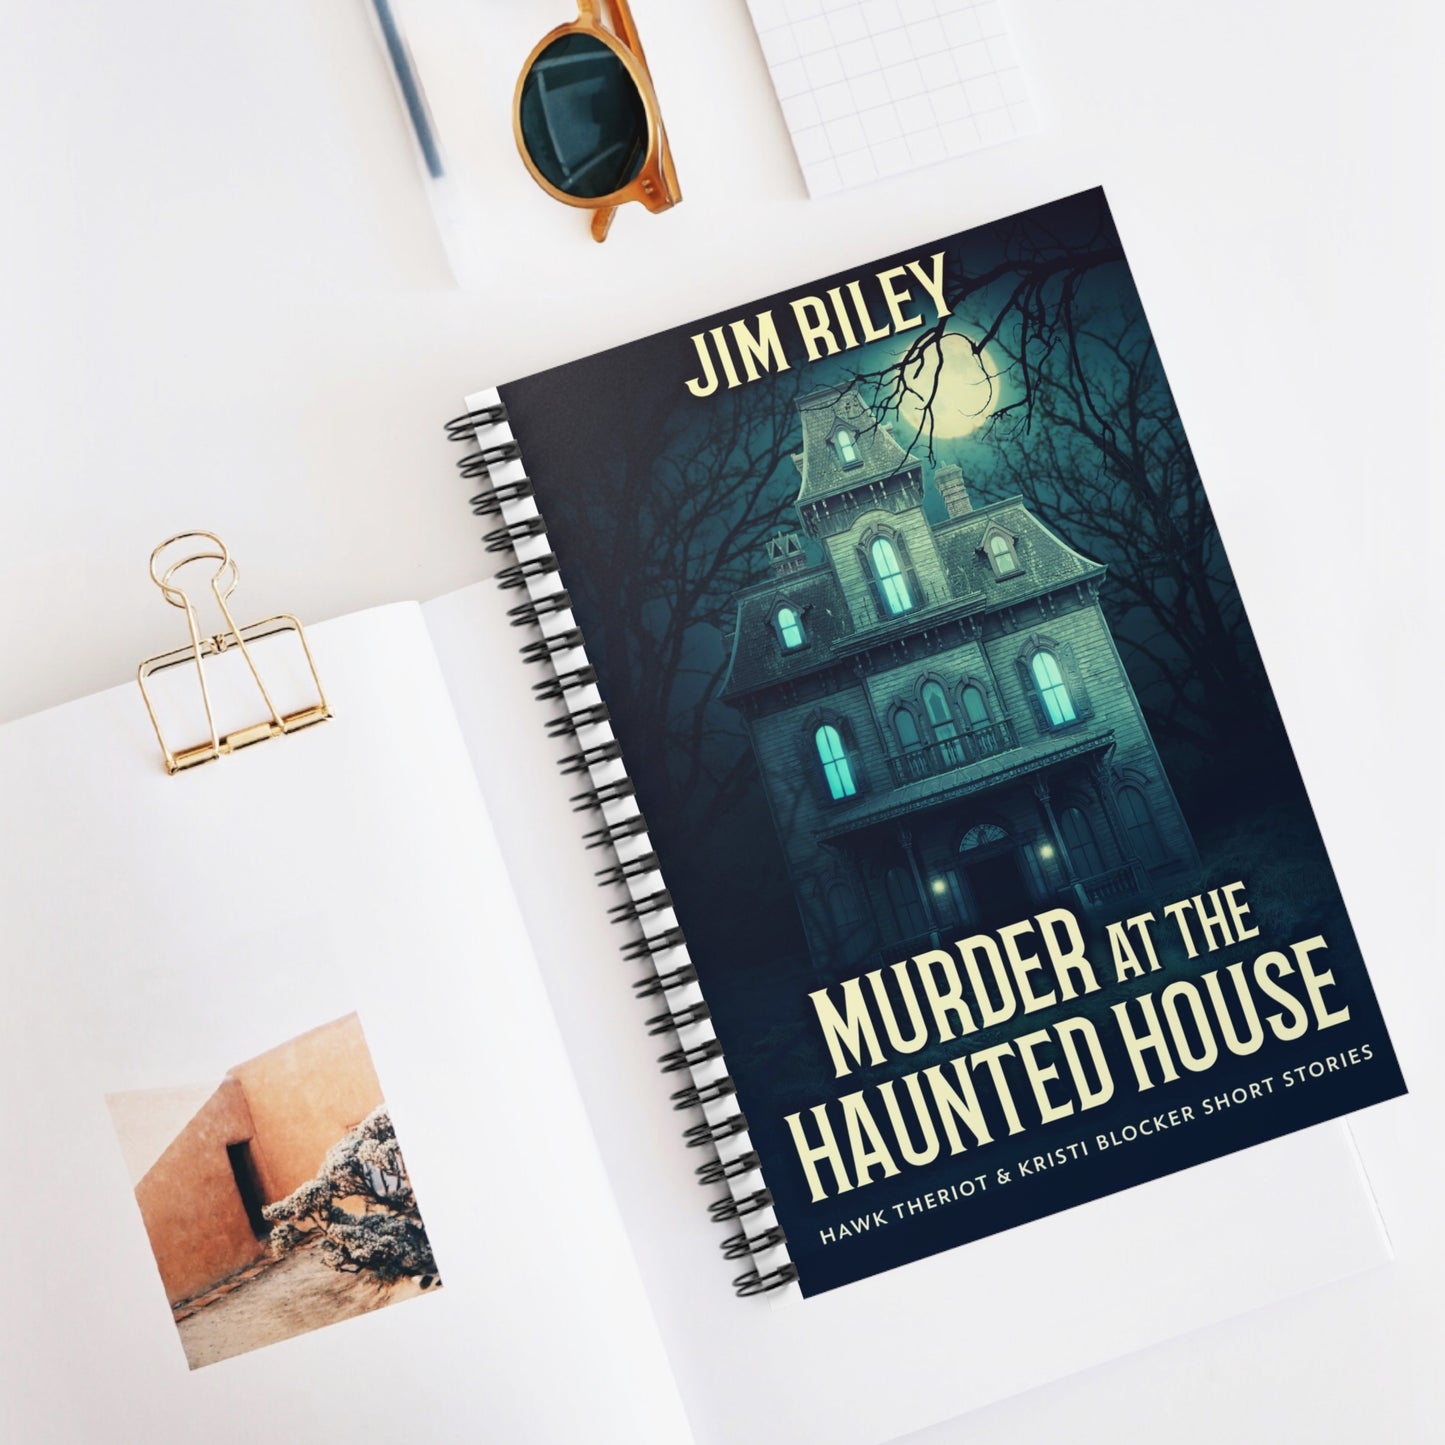 Murder at the Haunted House - Spiral Notebook